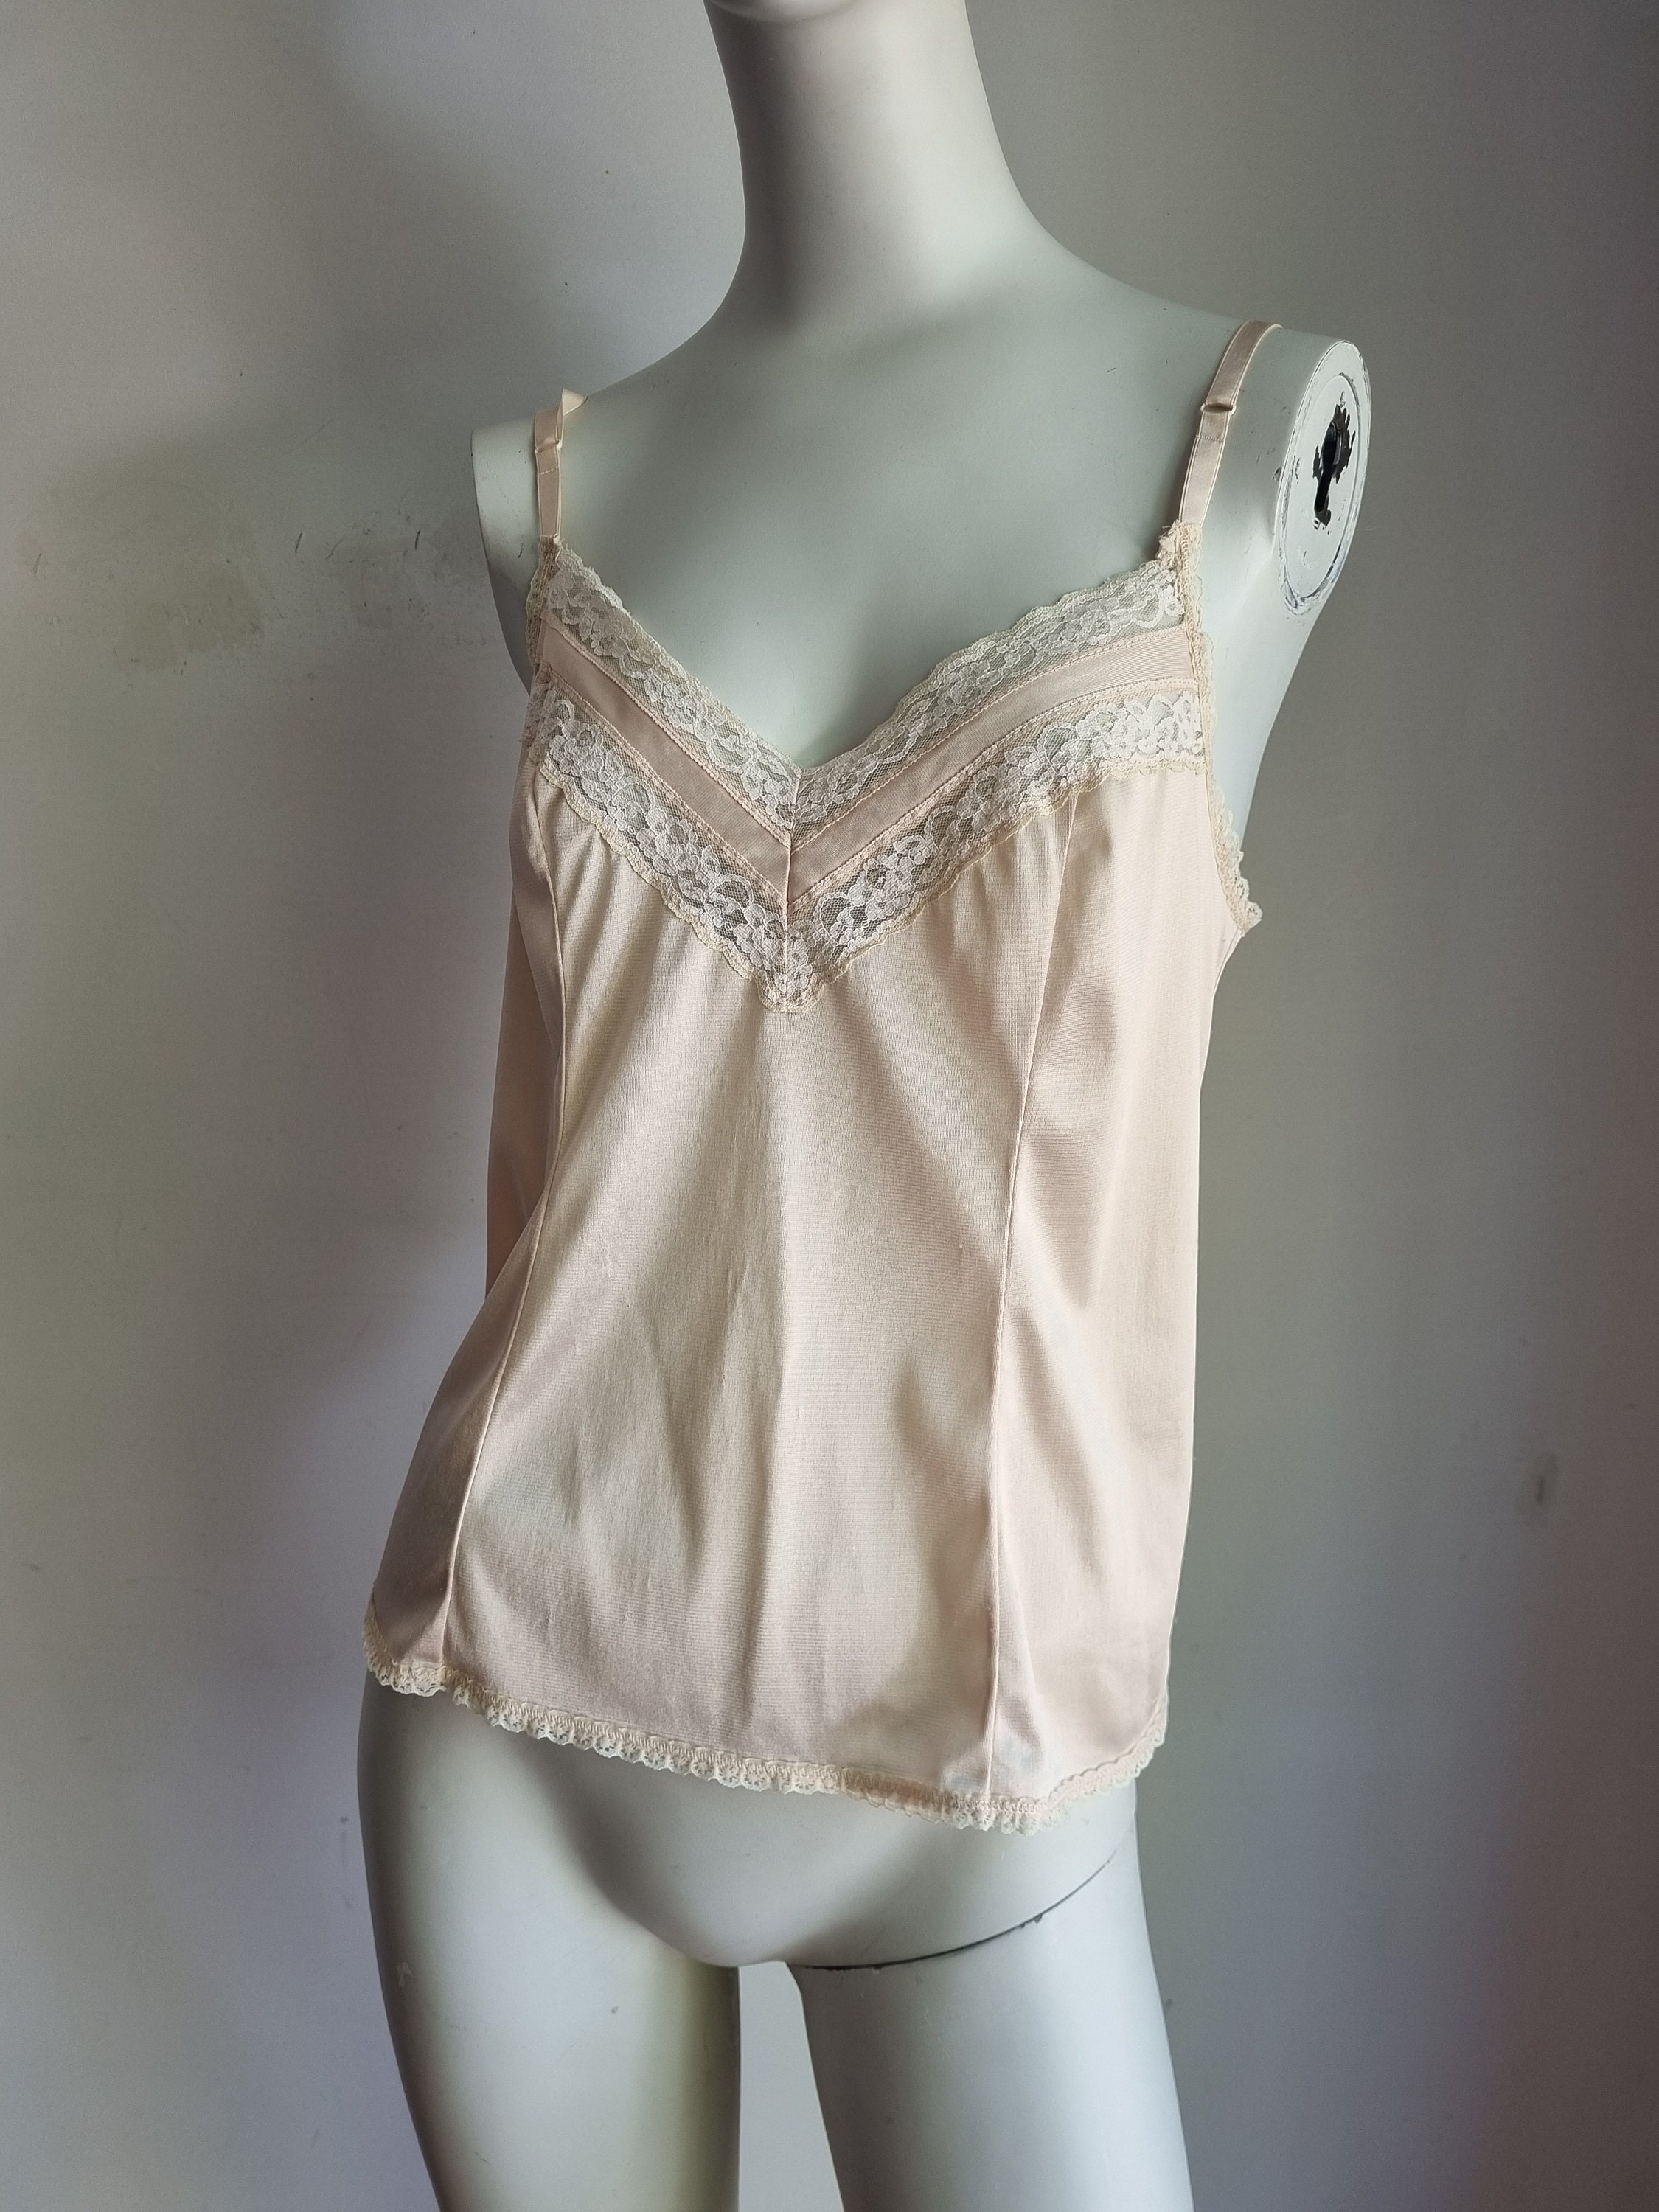 lace camisole AUBADE buff cream lacy tank top shell XS – Retro Trend Vintage